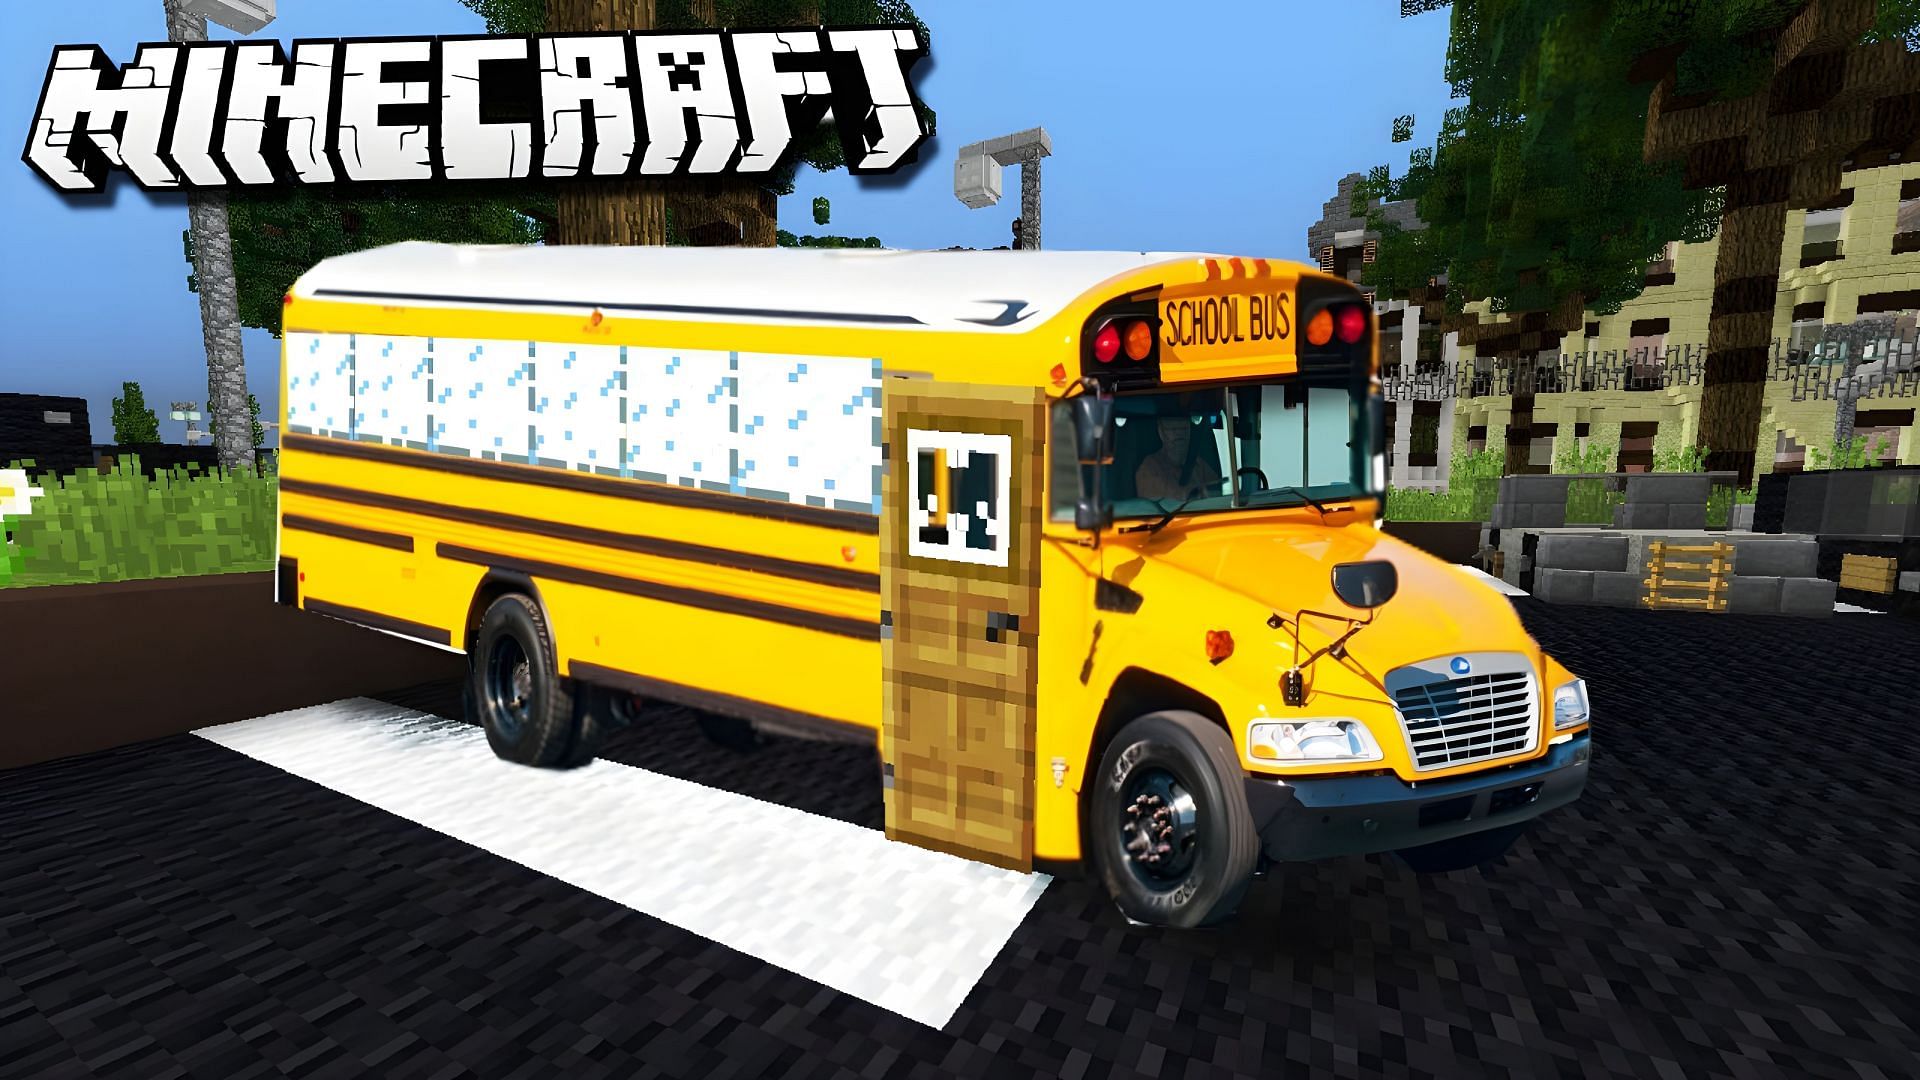 Minecraft school bus builds can be hard to design (Image via Youtube/Sub)